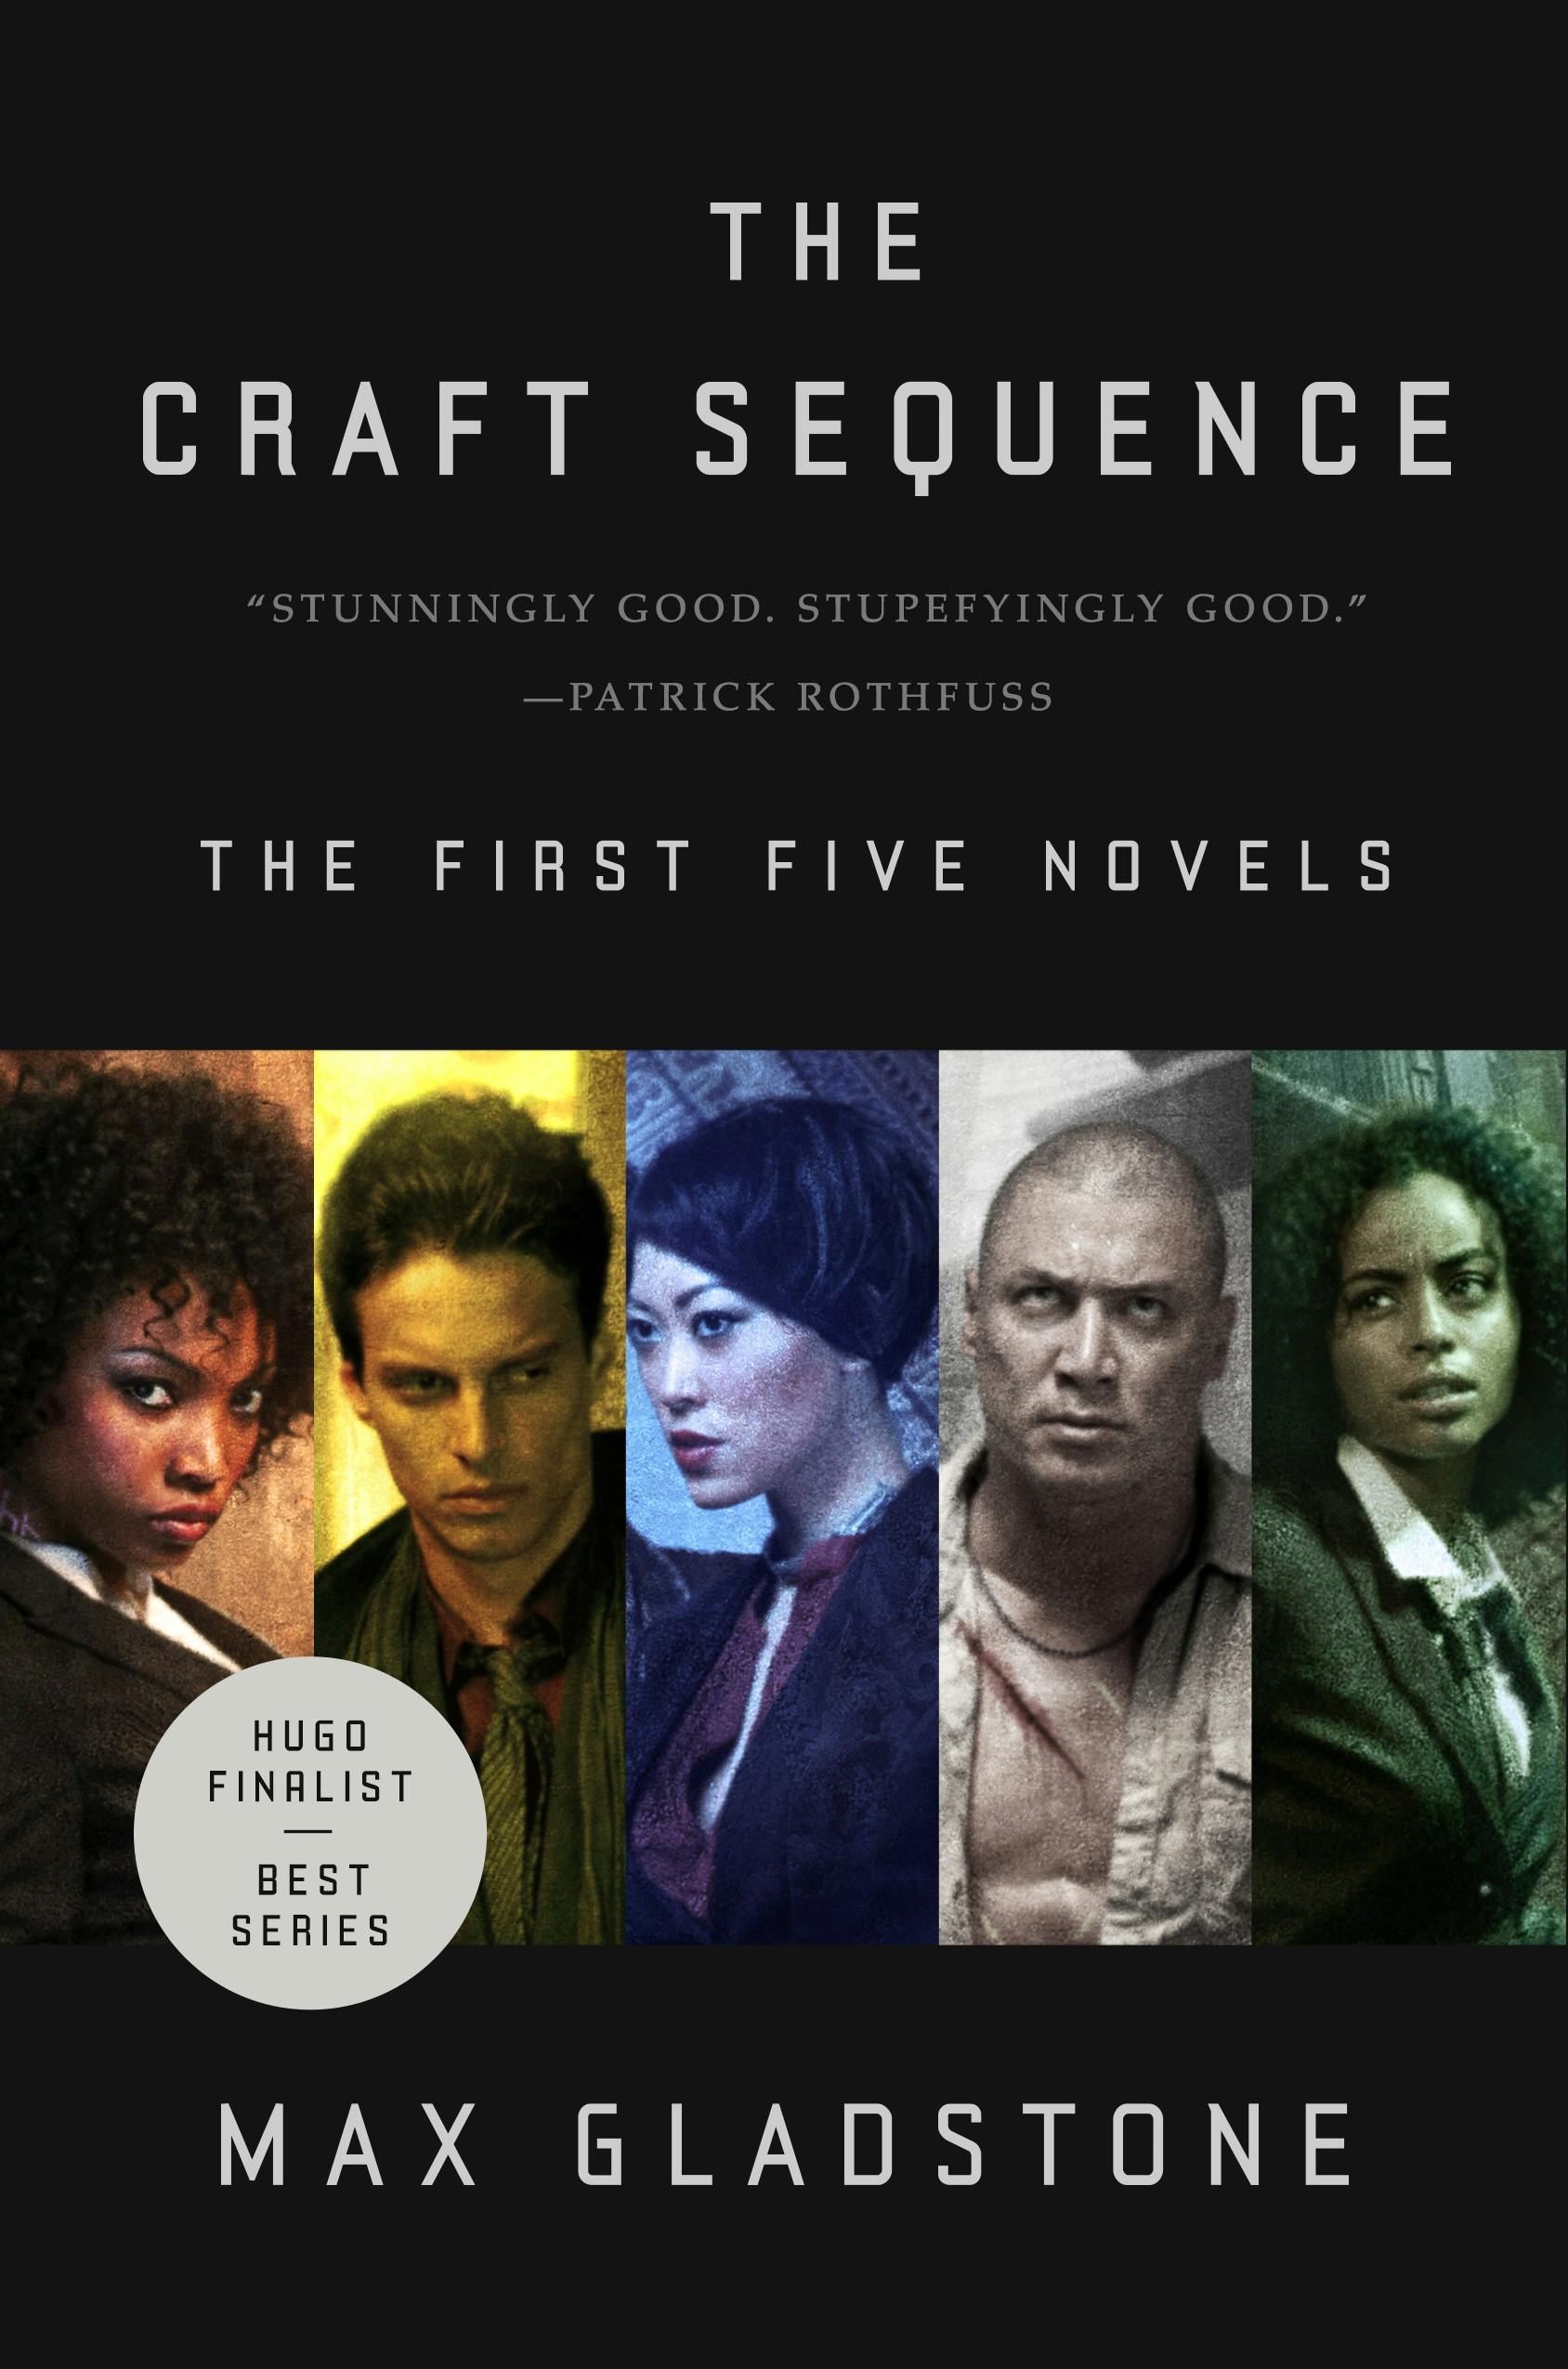 Cover for the book titled as: The Craft Sequence